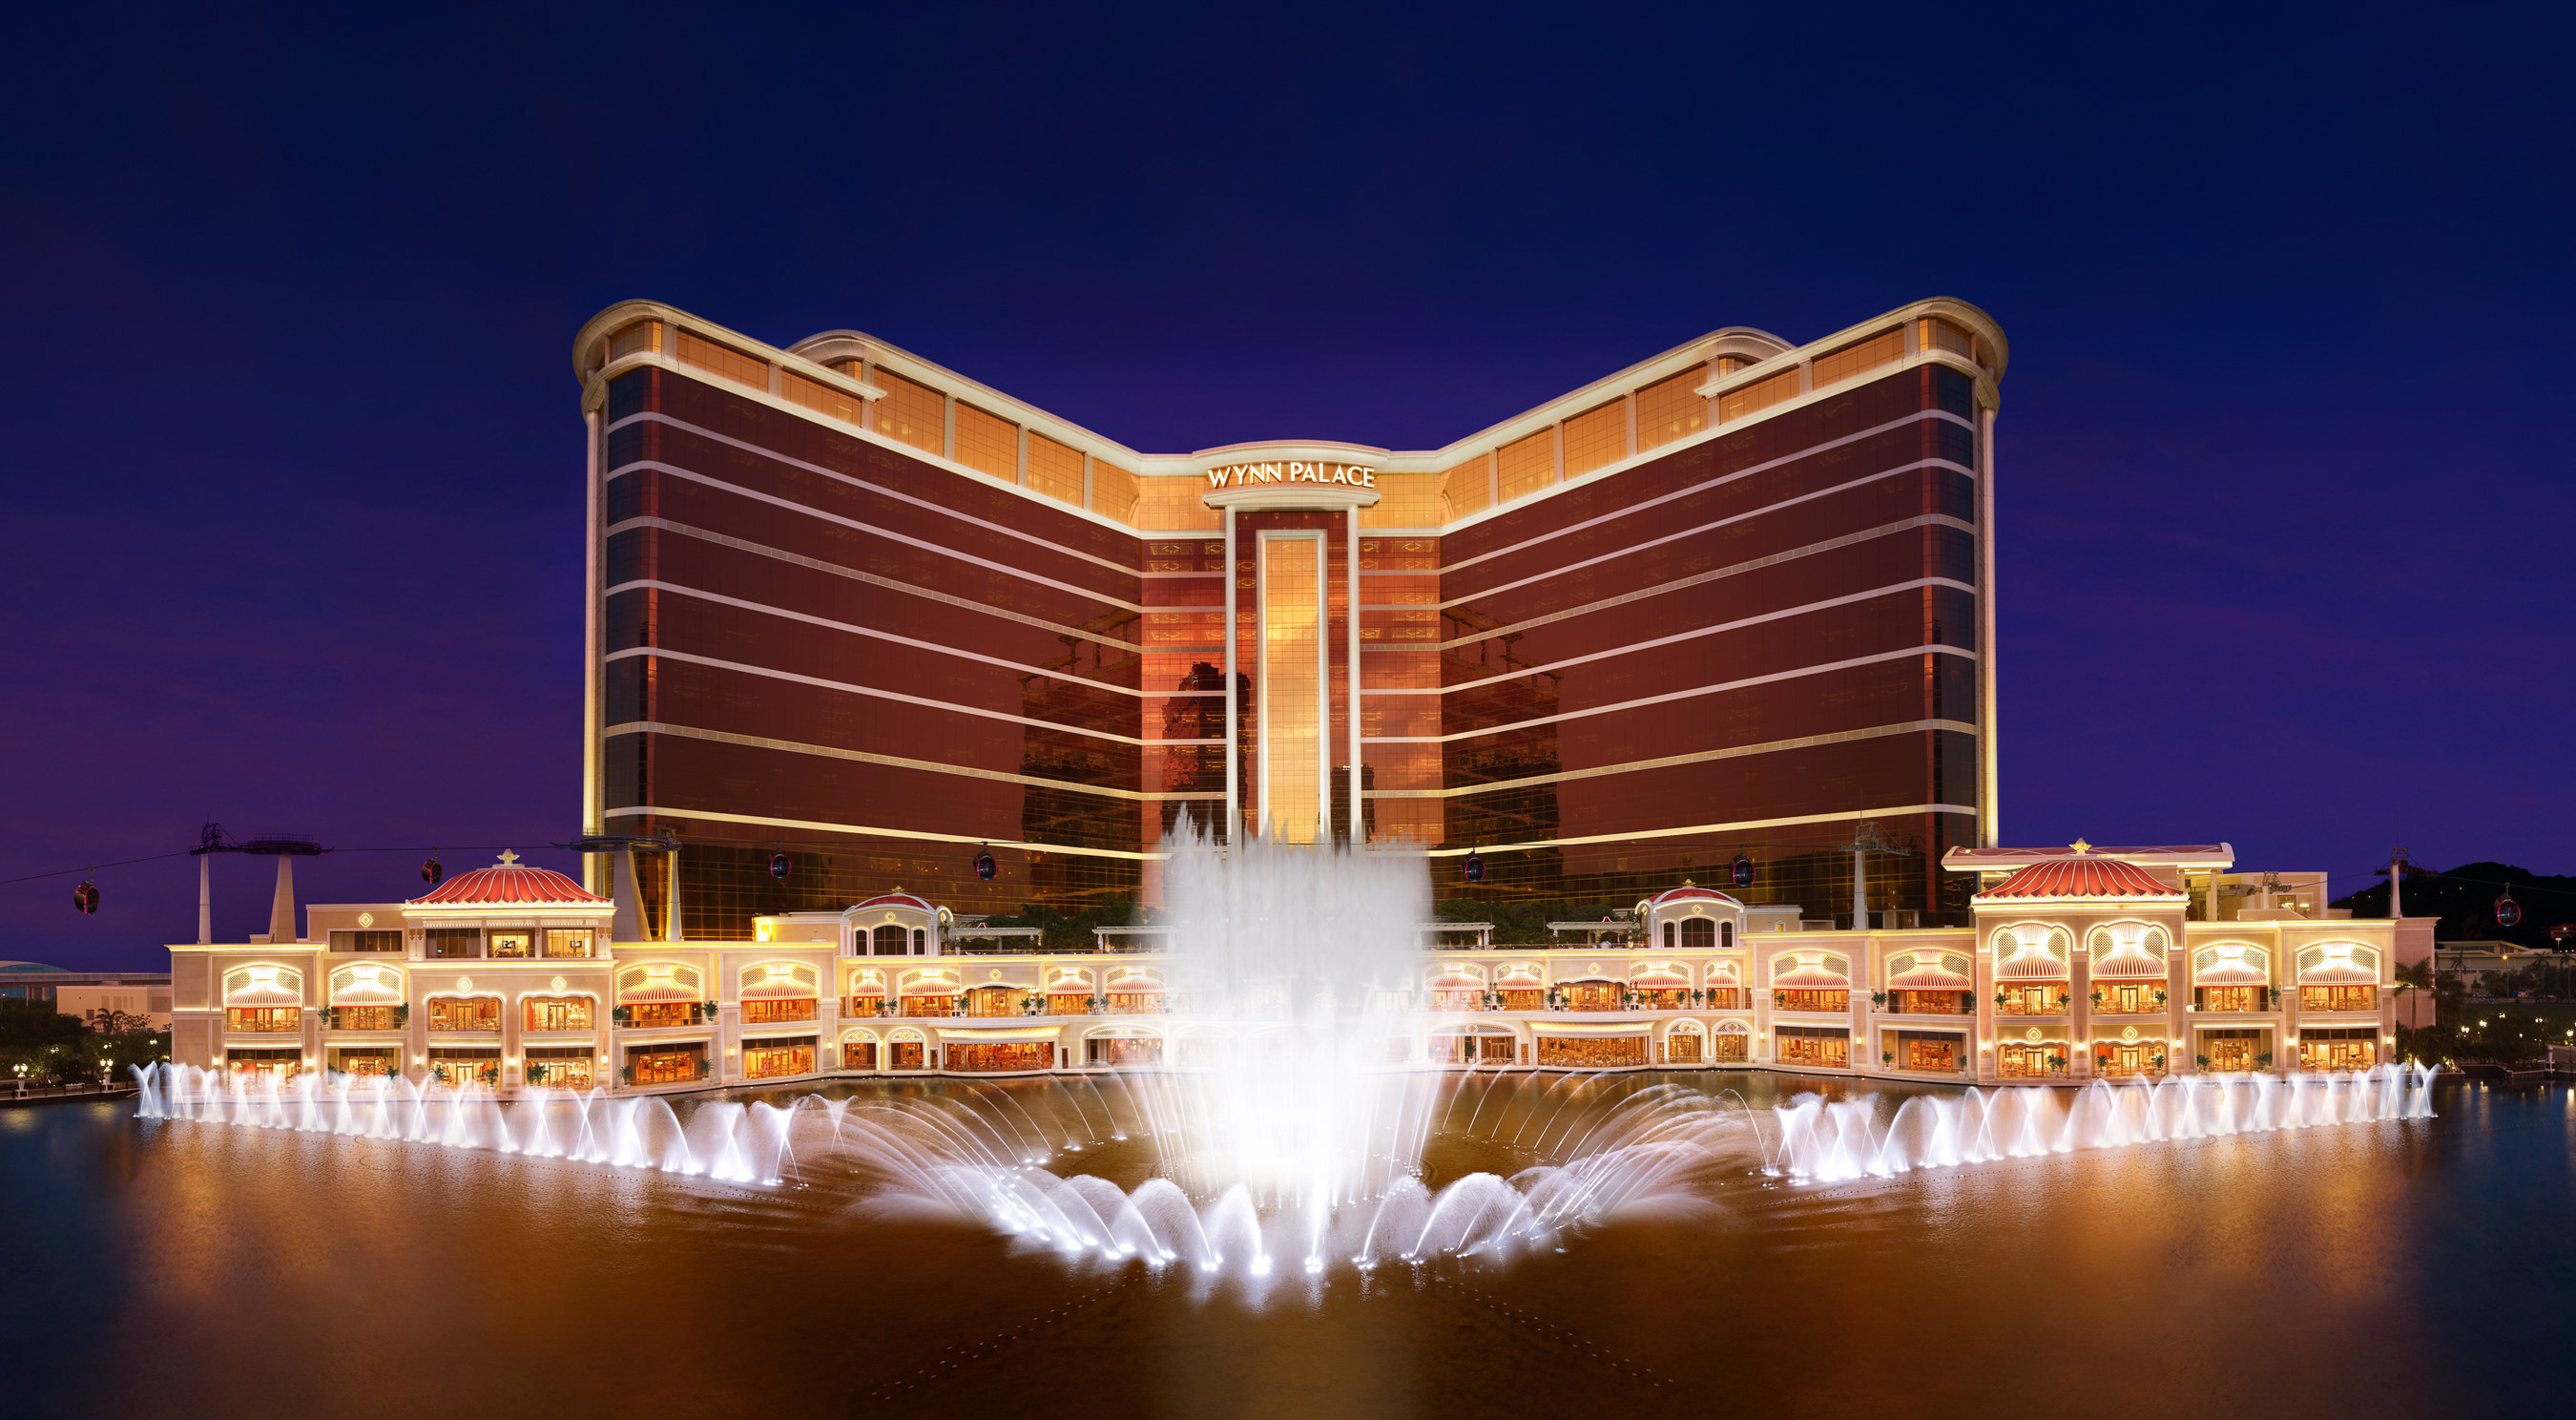 Wynn Palace it is the culmination of Steve Wynn’s more than 45 years in hospitality, setting a new standard for luxury and elegance.